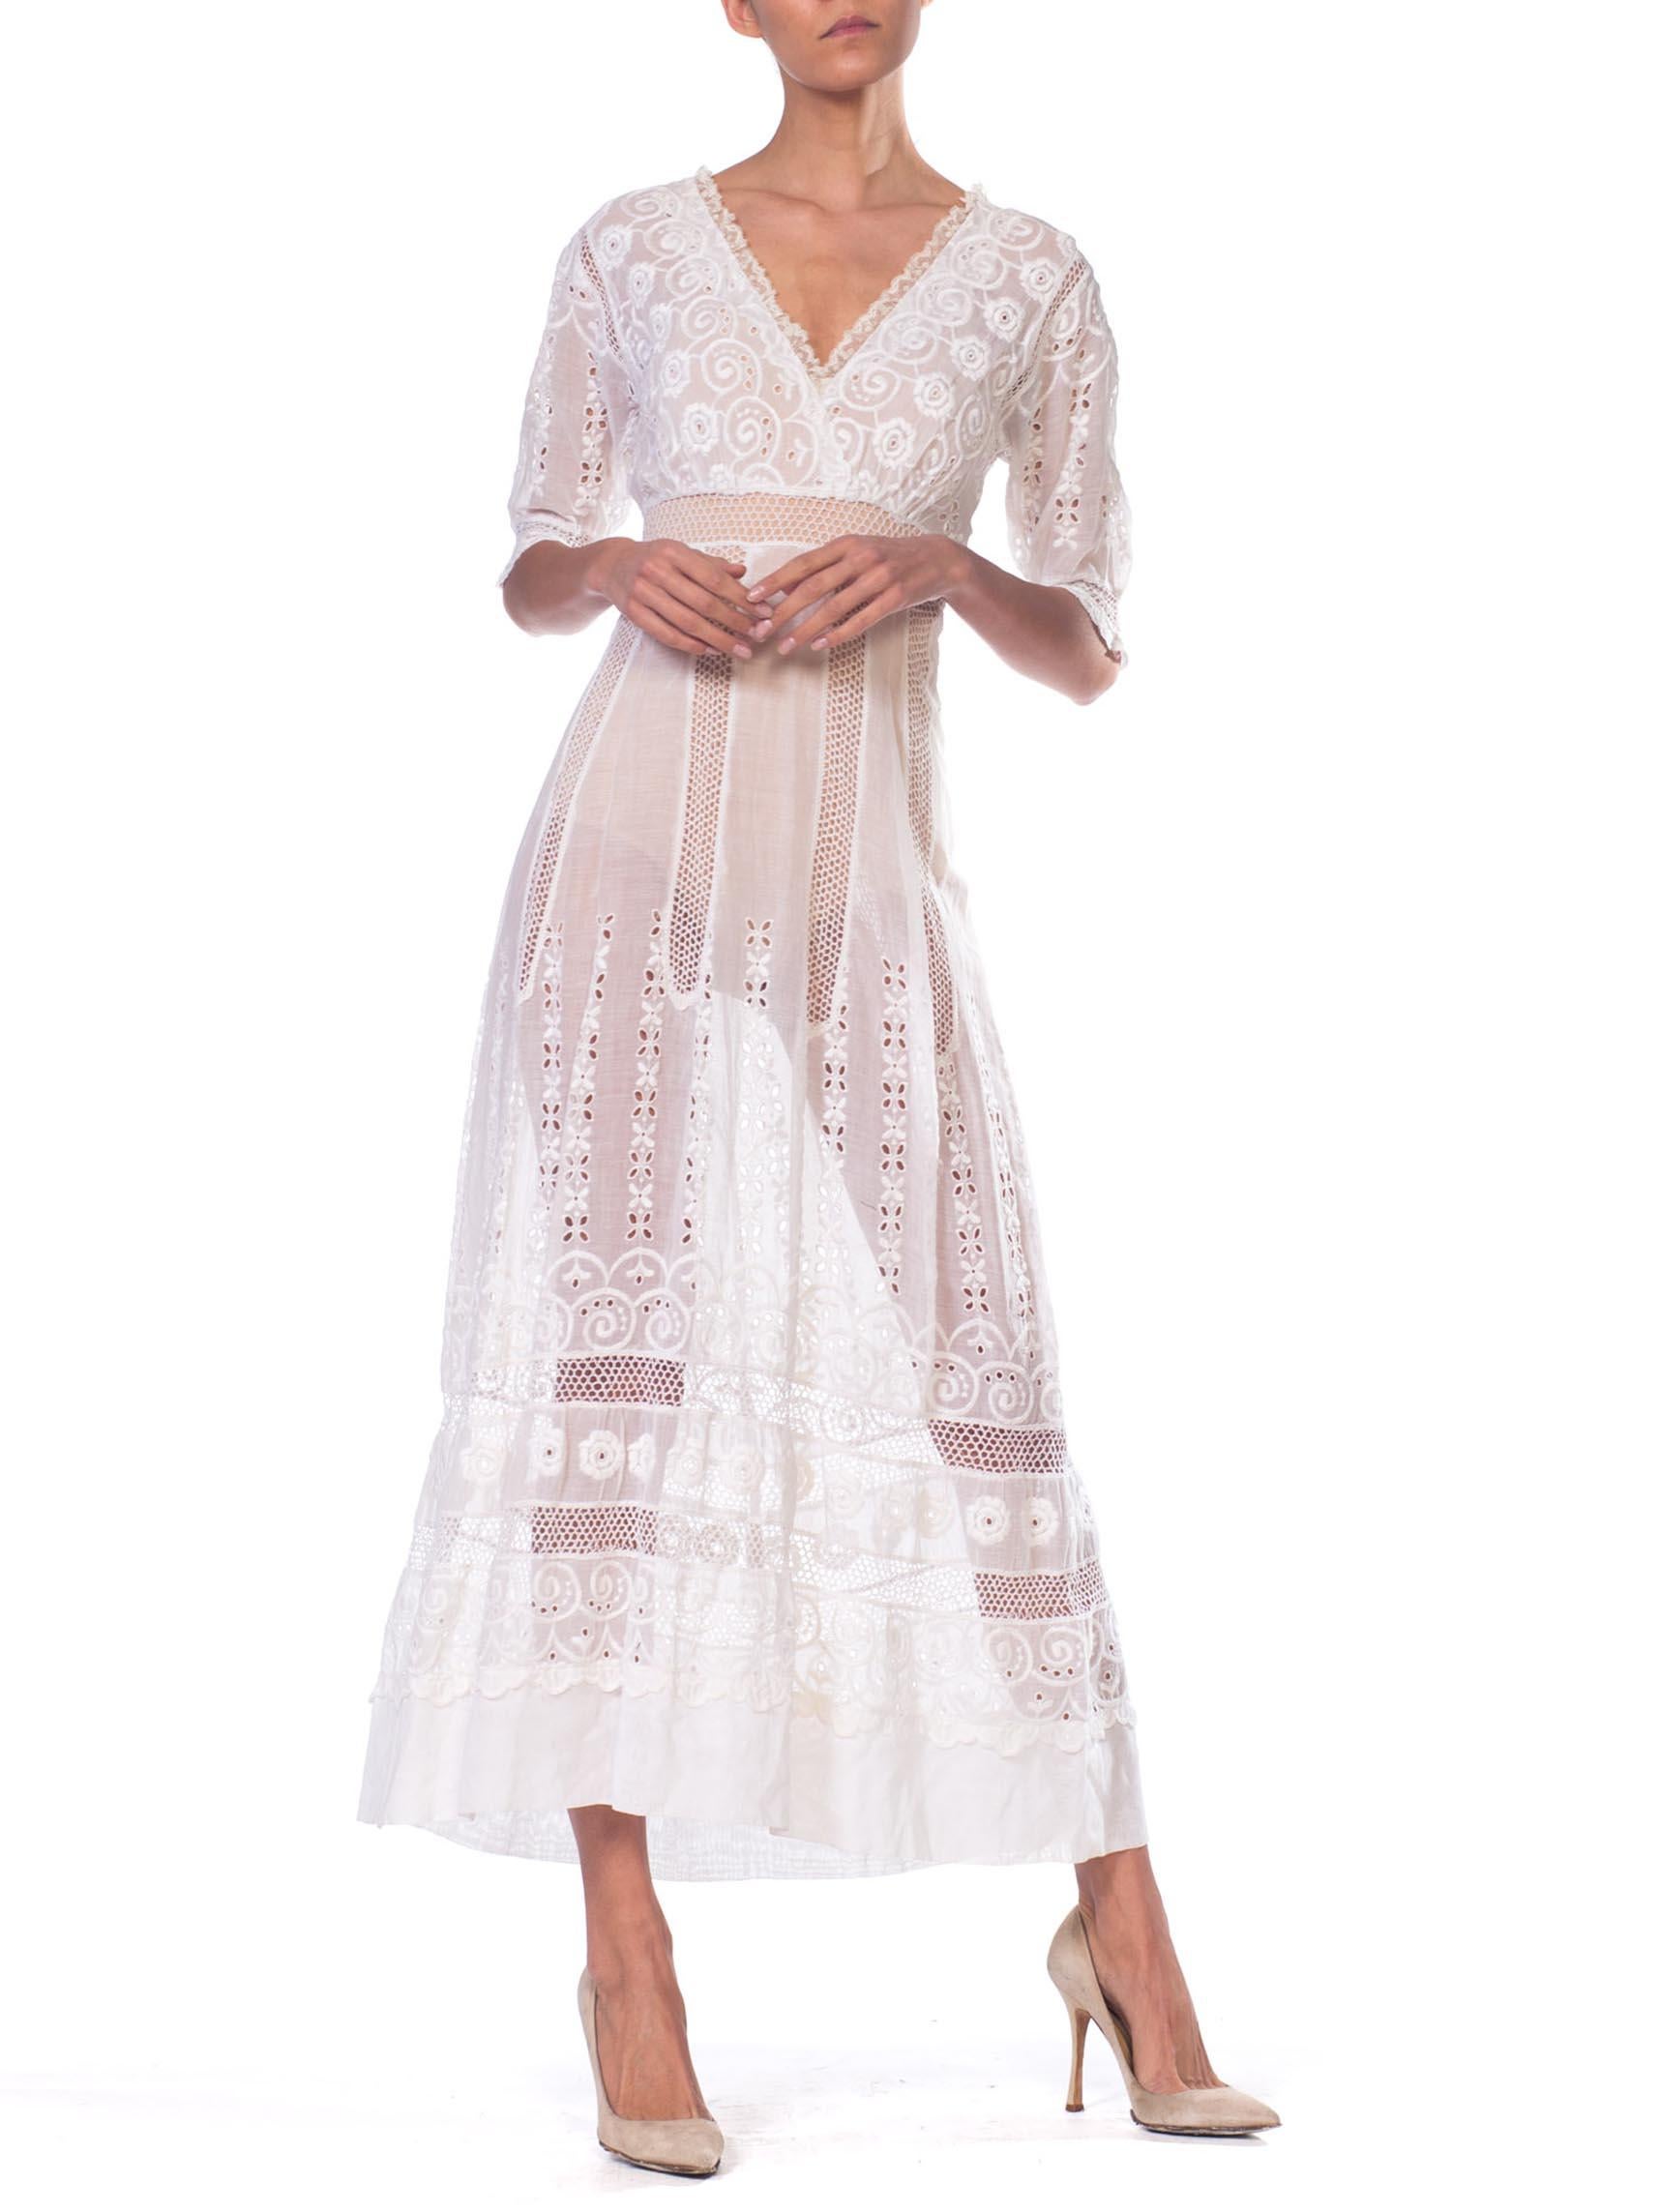 Edwardian Cream Embroidered Cotton Voile & Lace Tea Dress With Empire Waistline And Half Sleeves